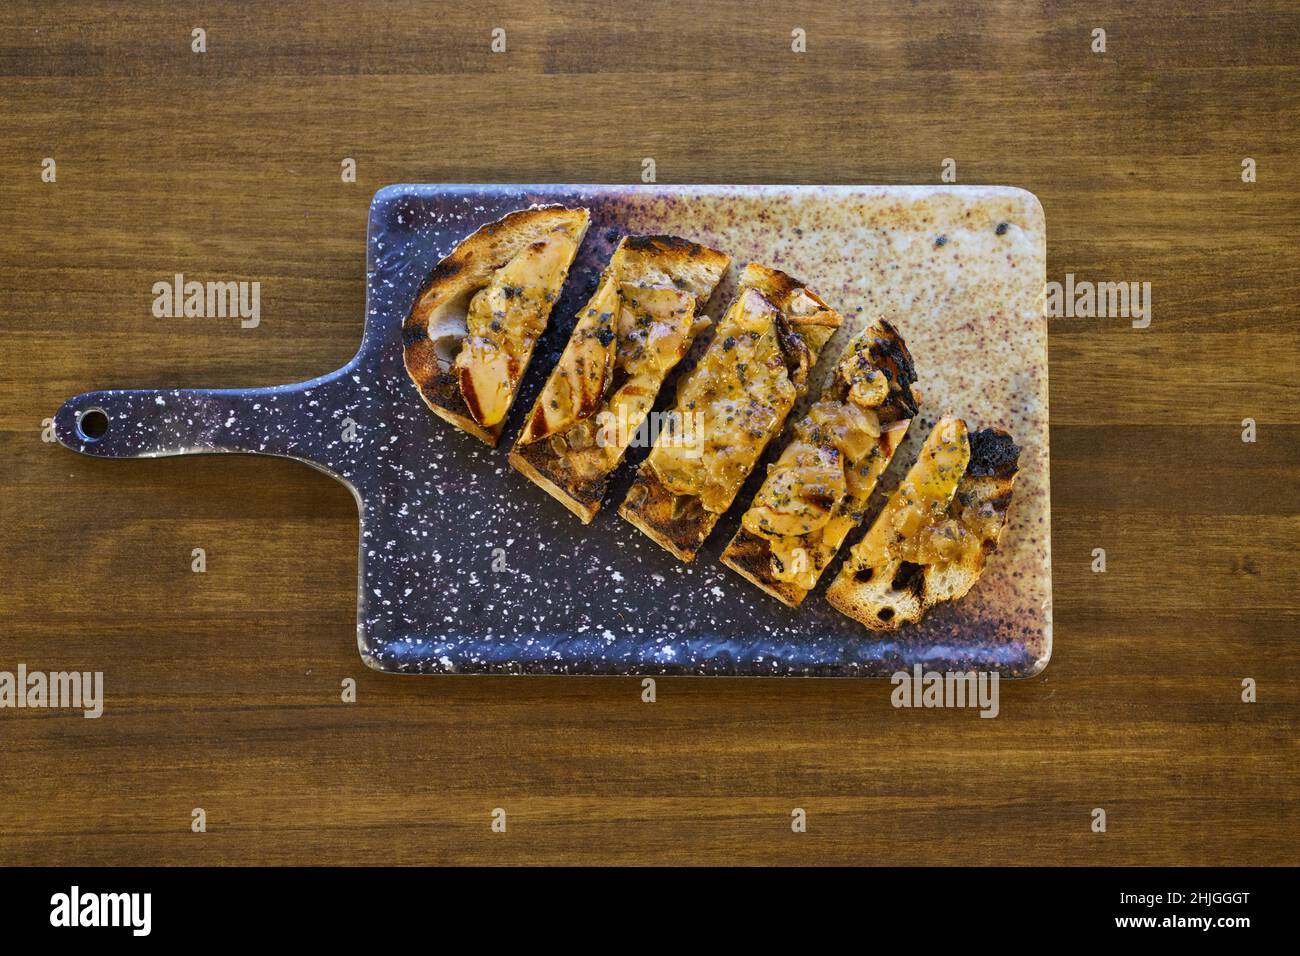 Cut toast of foie served on board Stock Photo